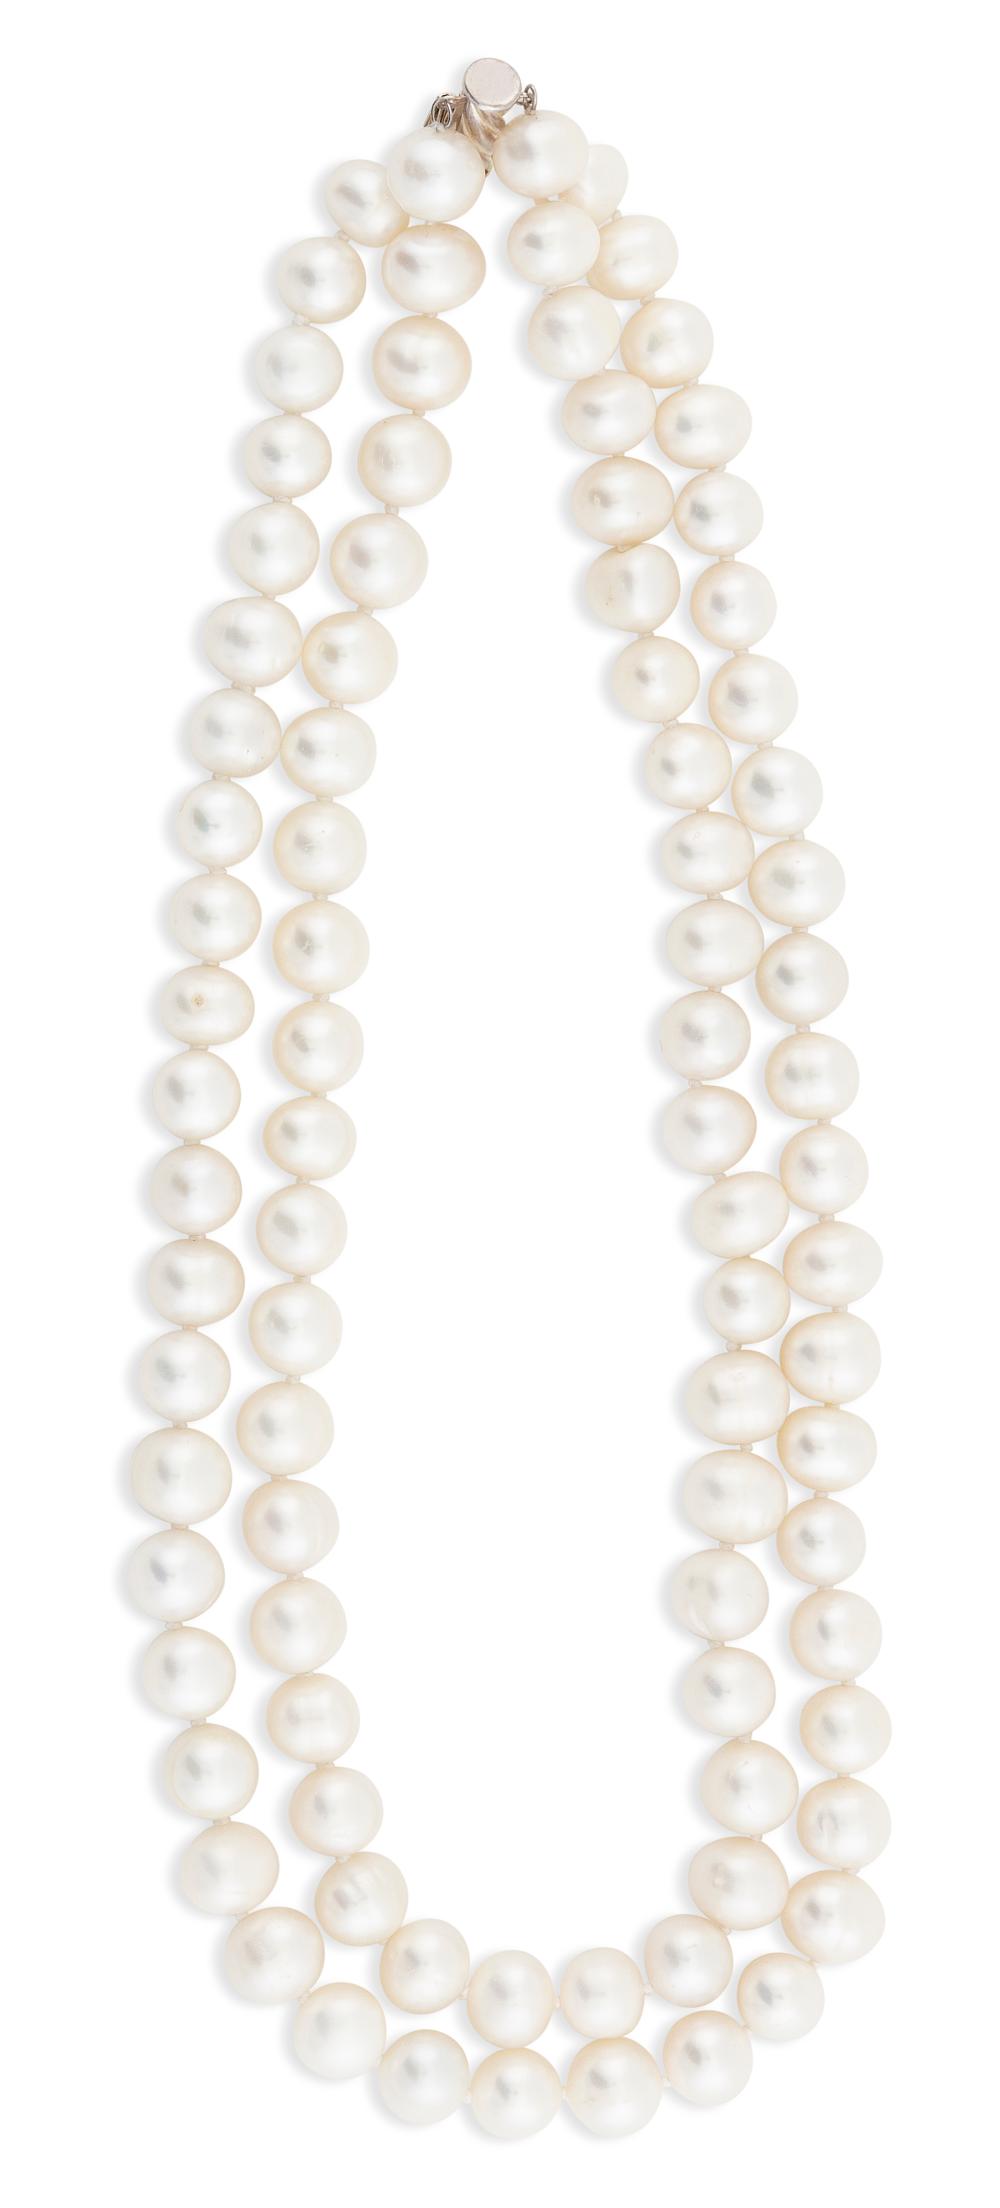 DOUBLE-STRAND BAROQUE PEARL NECKLACE